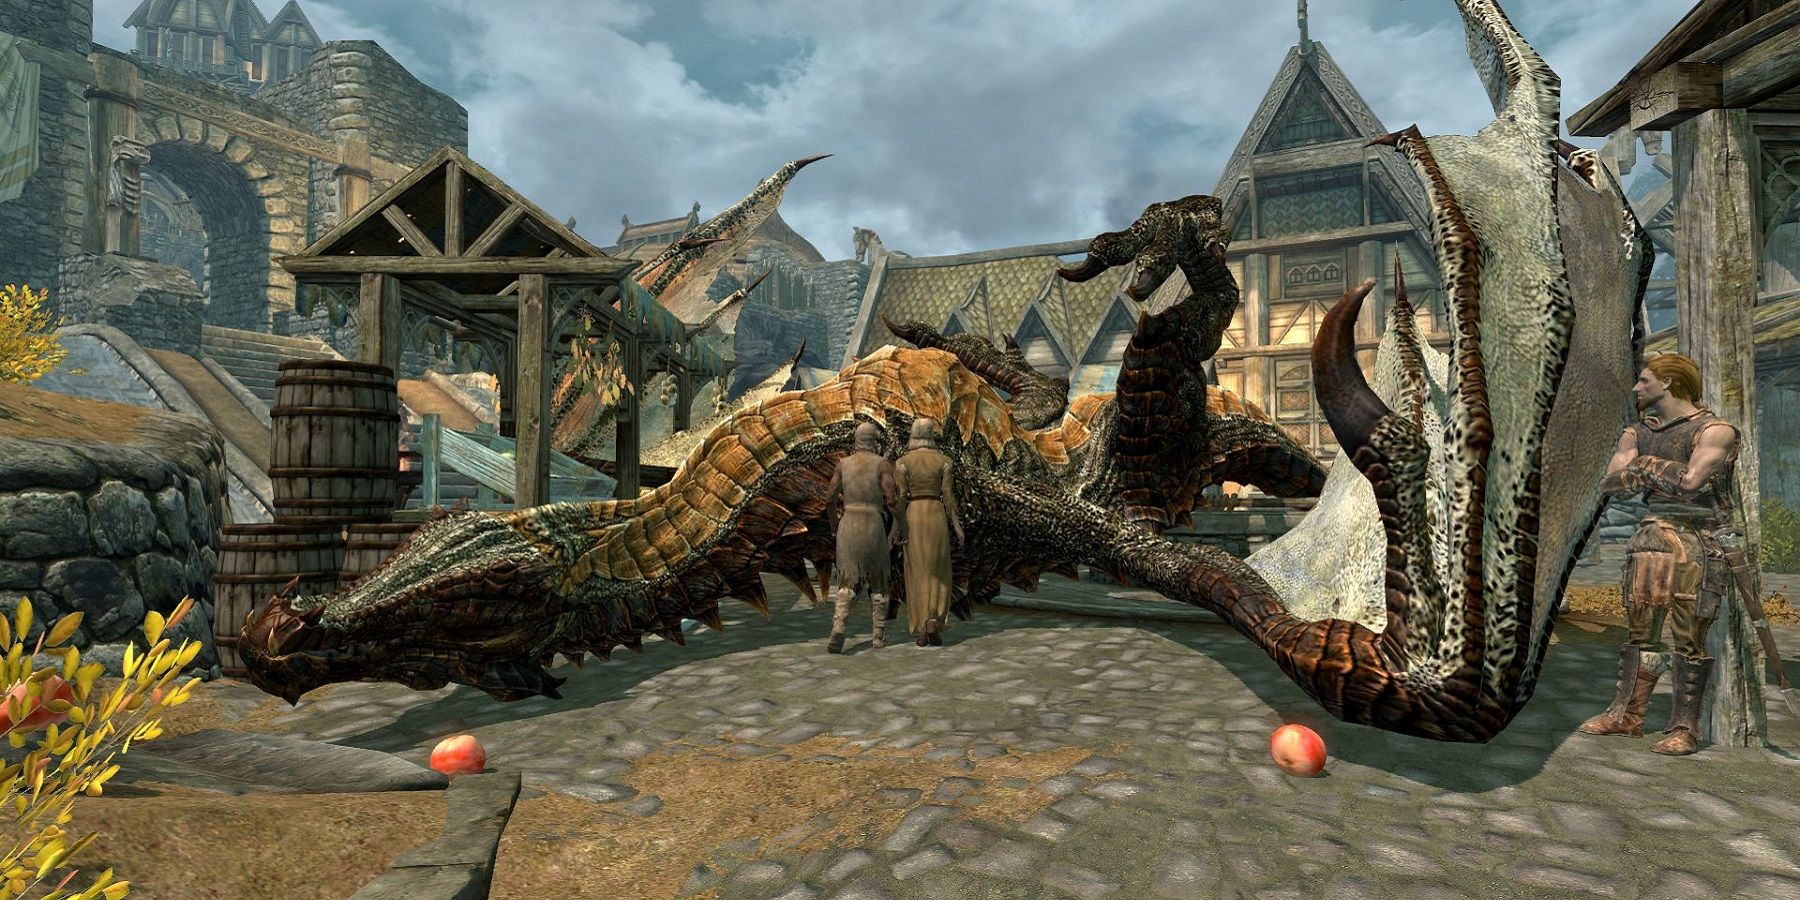 Screenshot from The Elder Scrolls 5: Skyrim showing a dragon lying dead in the middle of Whiterun.